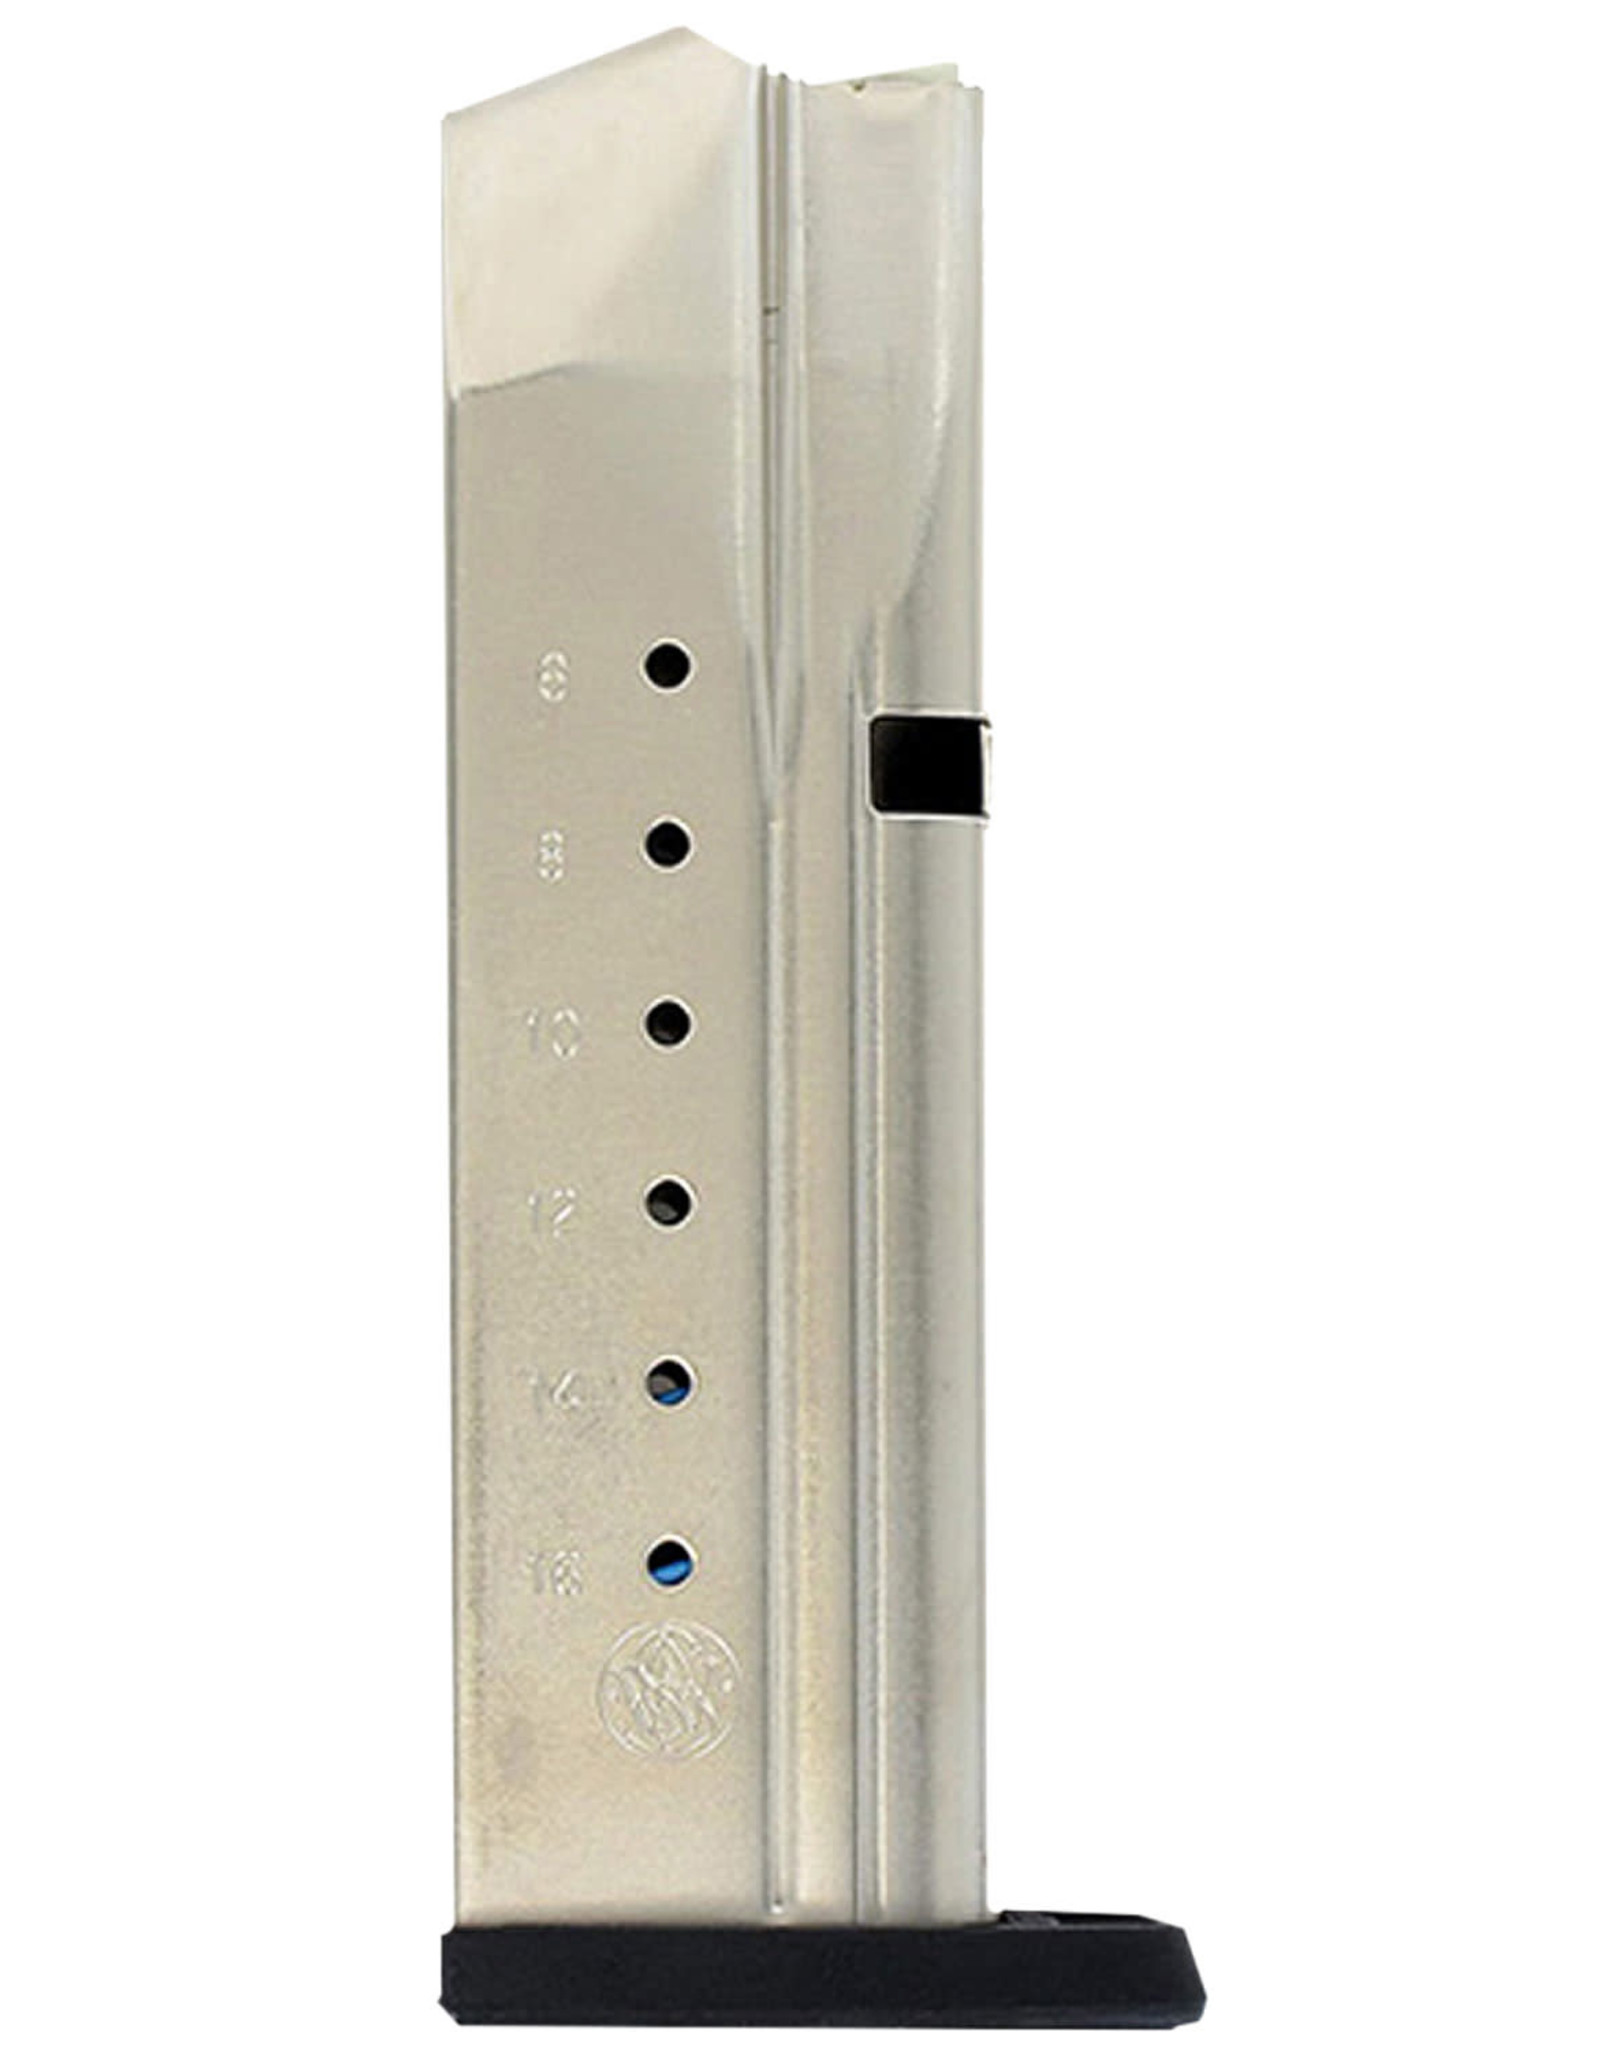 SMITH & WESSON Smith & Wesson SD9 9mm 16 Rnd Magazine